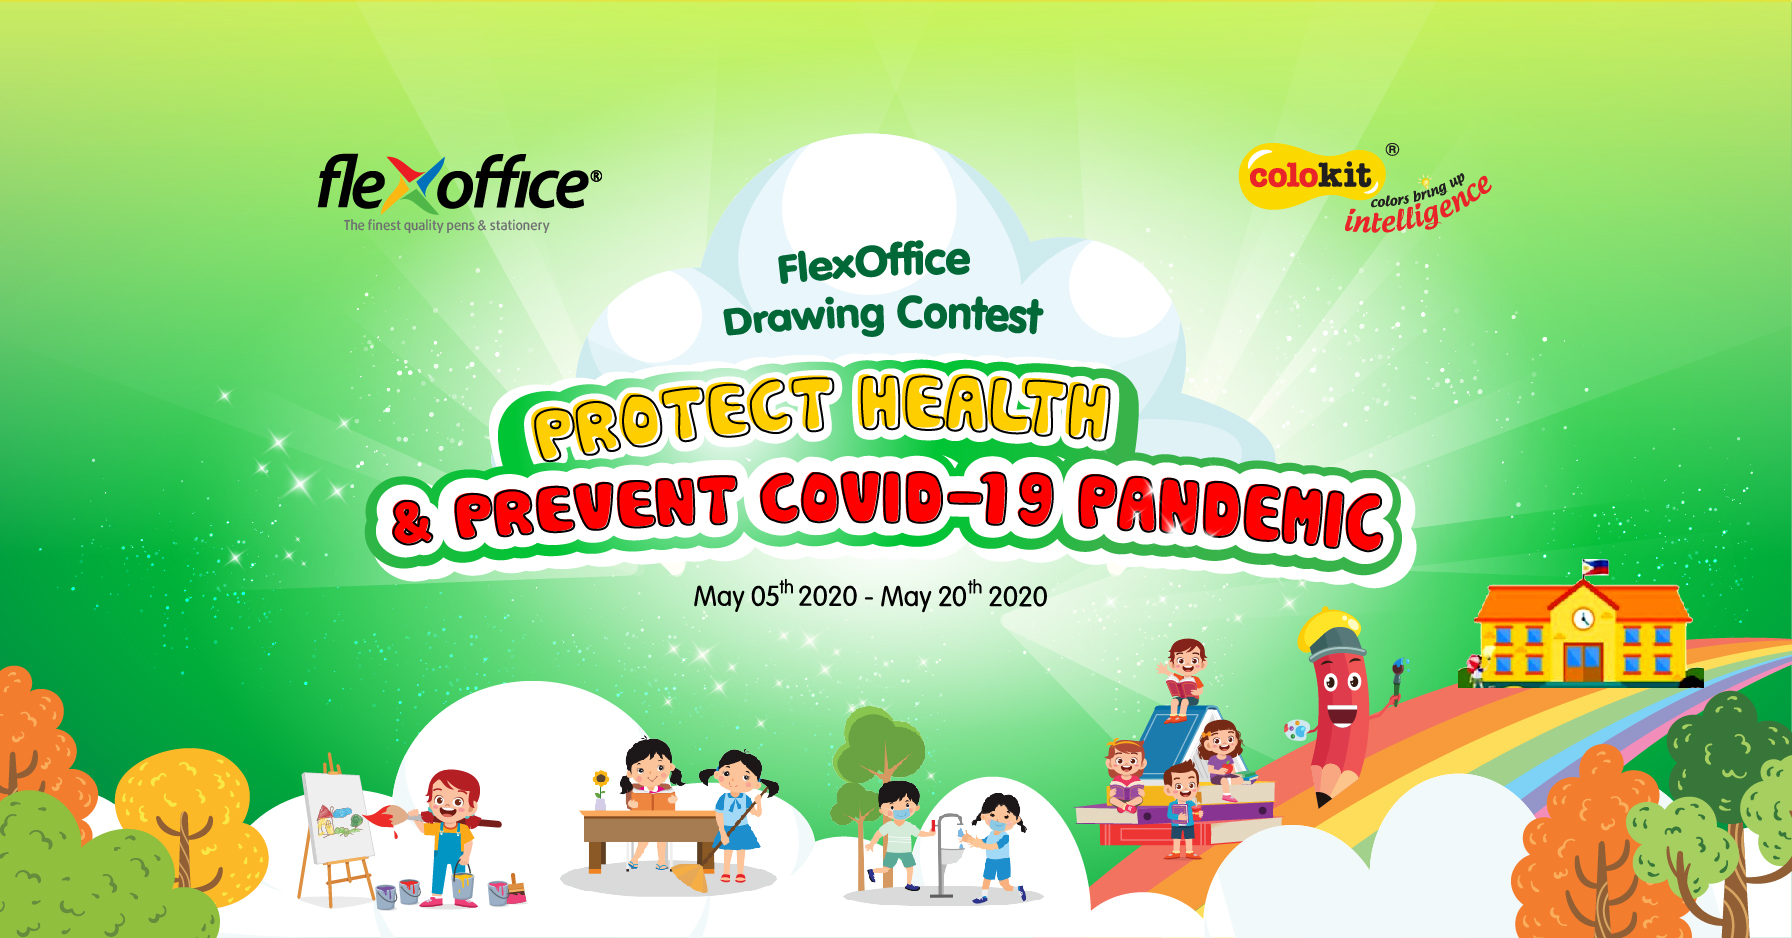 THE 2020 FLEXOFFICE DRAWING CONTEST IN THE PHILIPPINES